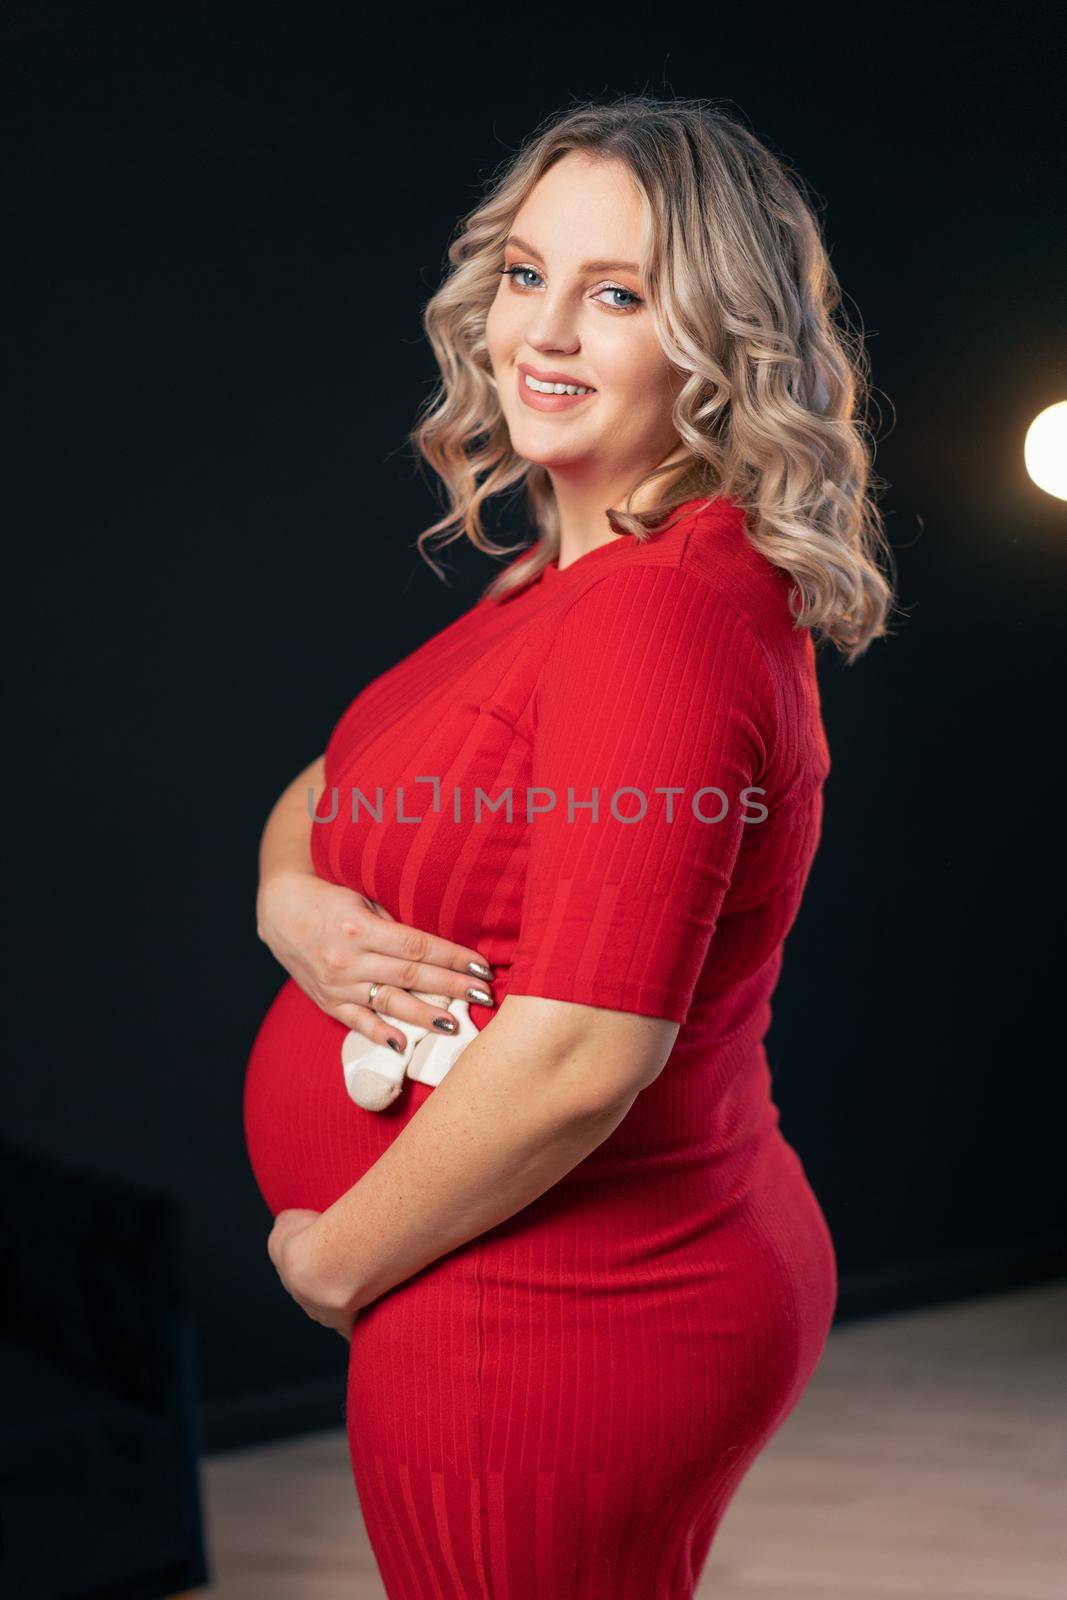 Pregnant Woman Posing In An Elegant red Dress indoors studio black wall background Blonde caucasian middle age female six month pregnancy